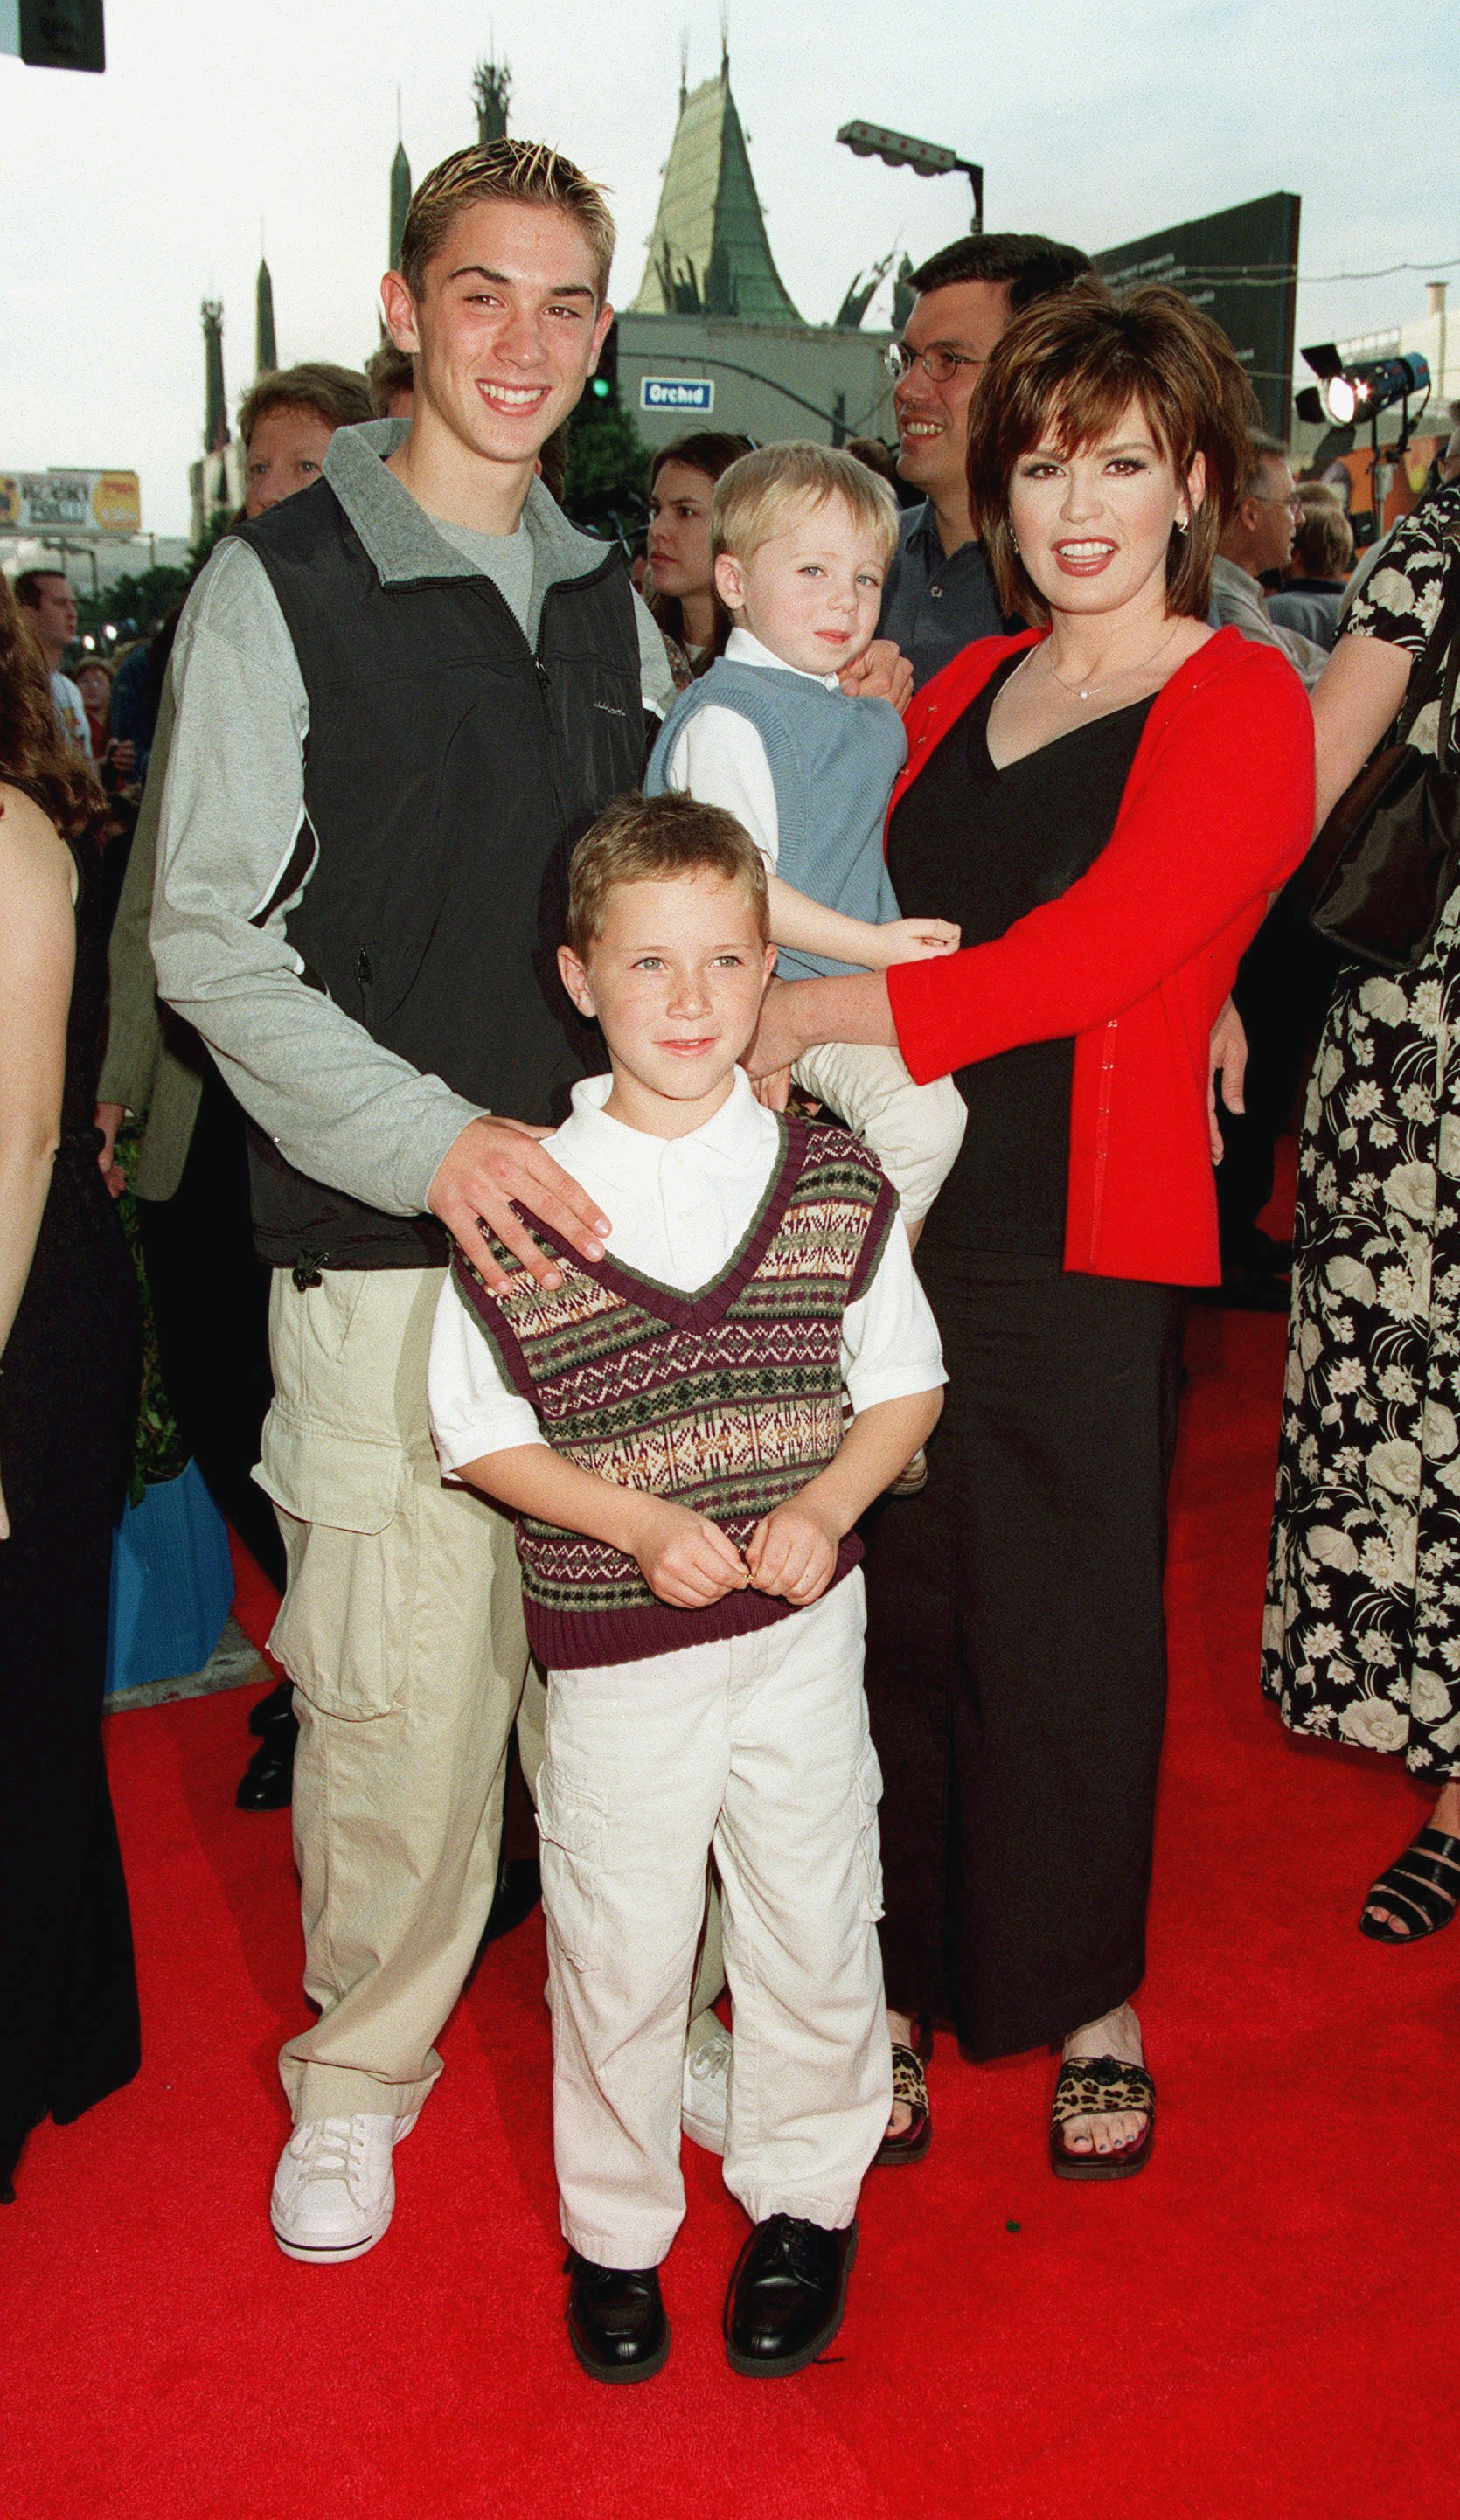 Marie Osmond with her sons Stephen [Far Left]Michael [standing] and Brandon at the world premiere of "toy story 2" in Los Angeles |  Source: Getty Images